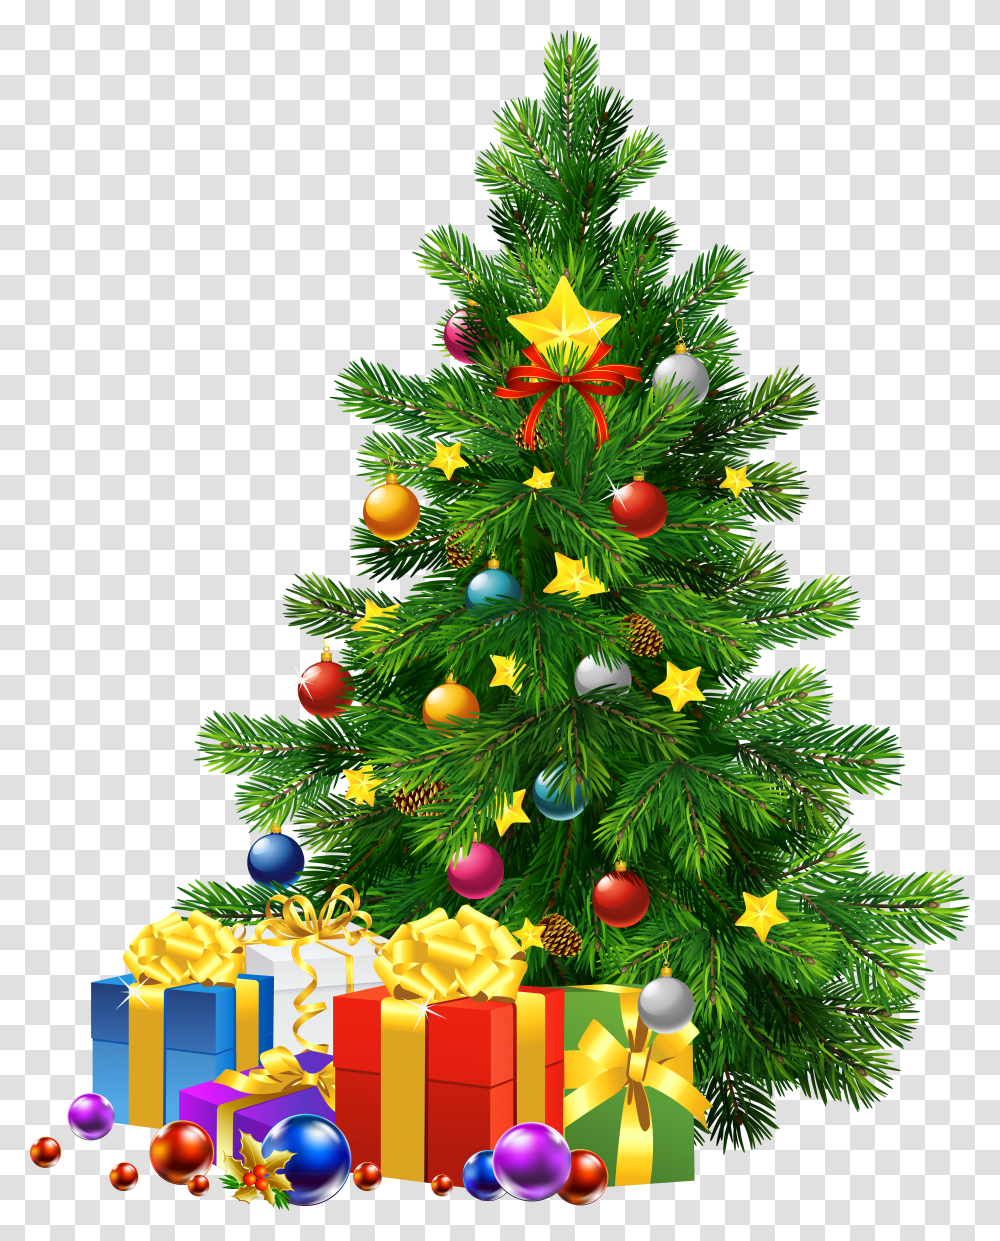 Large Christmas Tree With Gifts Format Christmas Tree Transparent Png